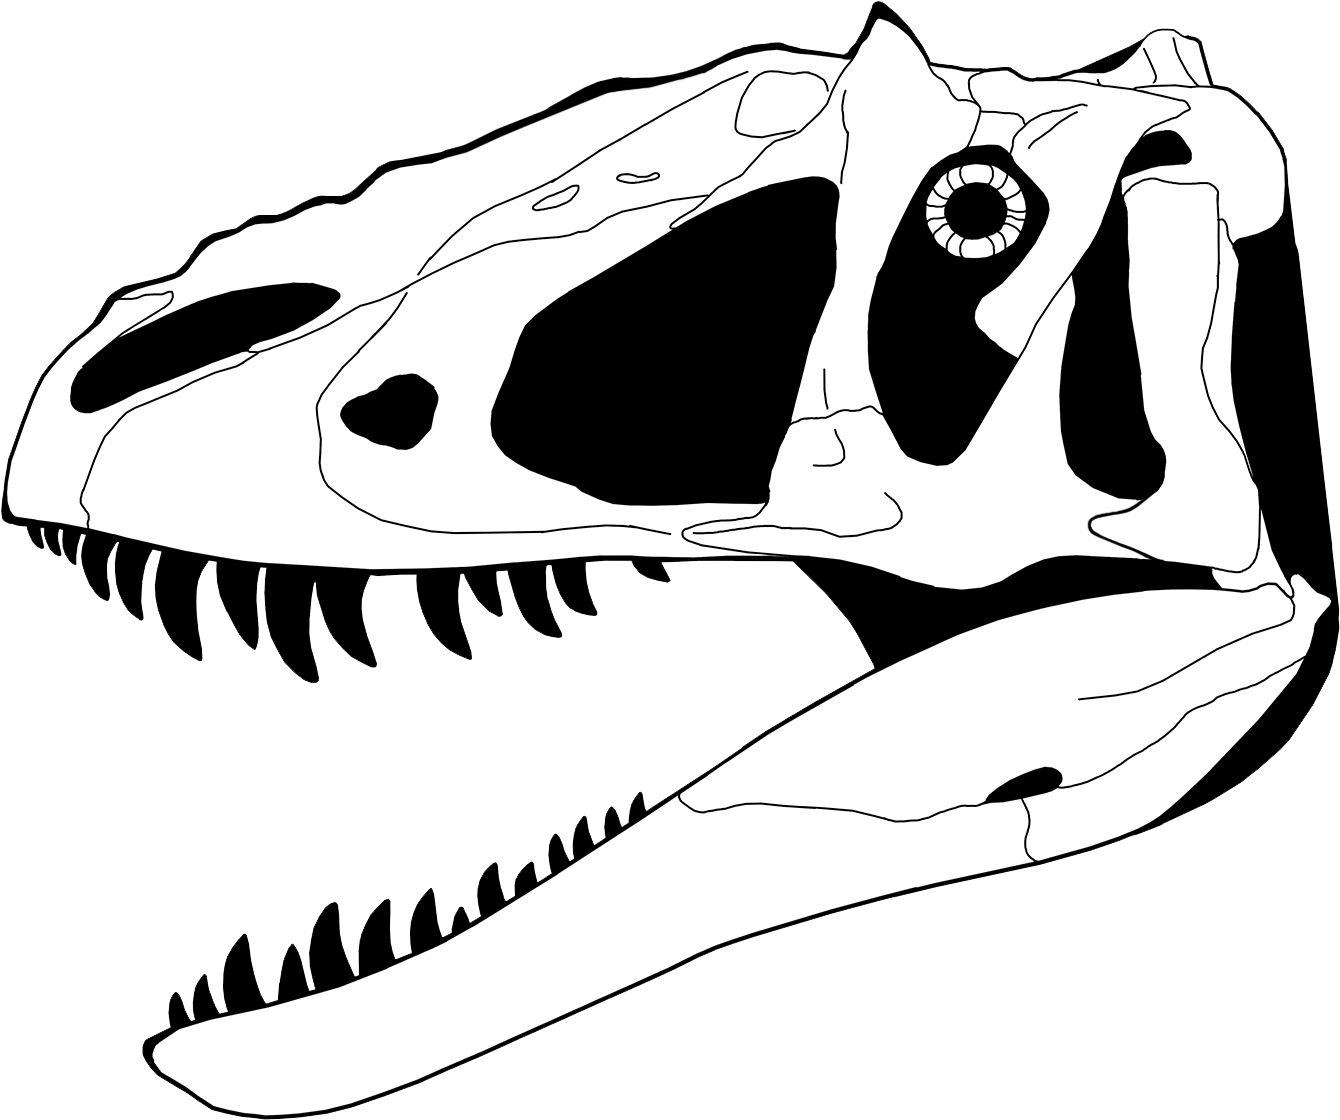 T Rex Skeleton Clipart - Dinosaur Skull Coloring Page (1400x1250)